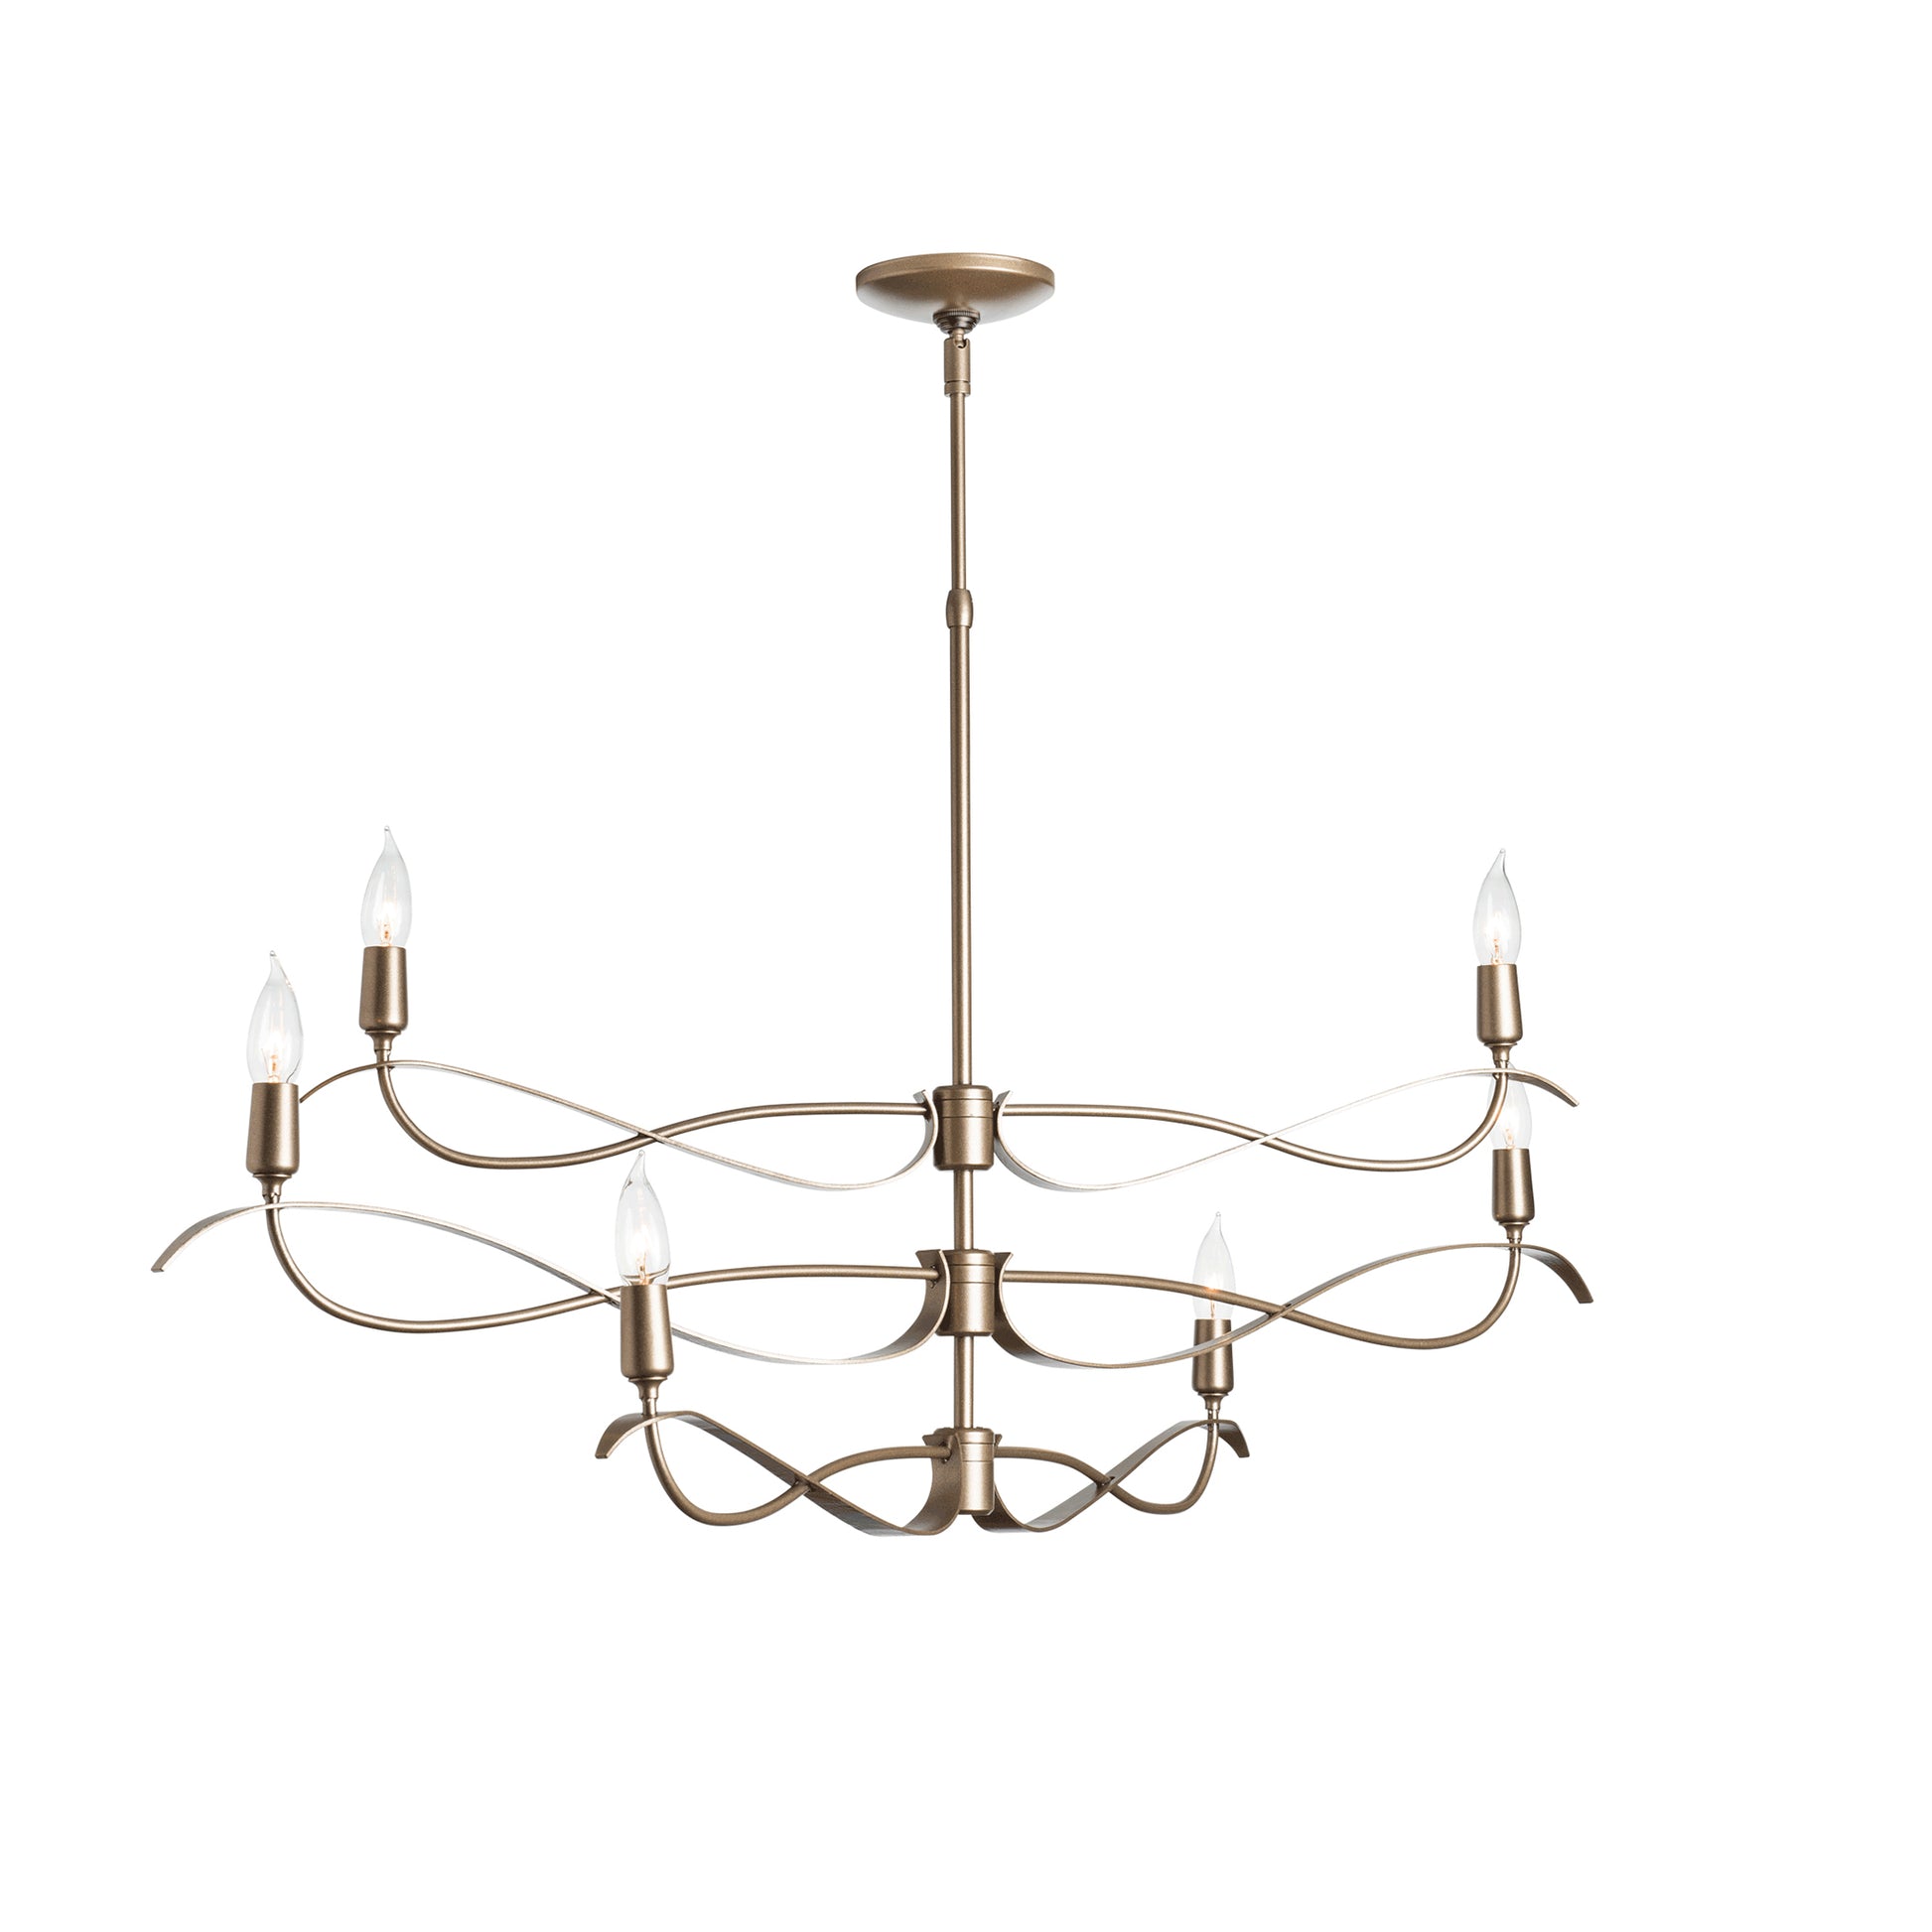 A modern design Willow 6-Light Small Chandelier with five lights by Hubbardton Forge.